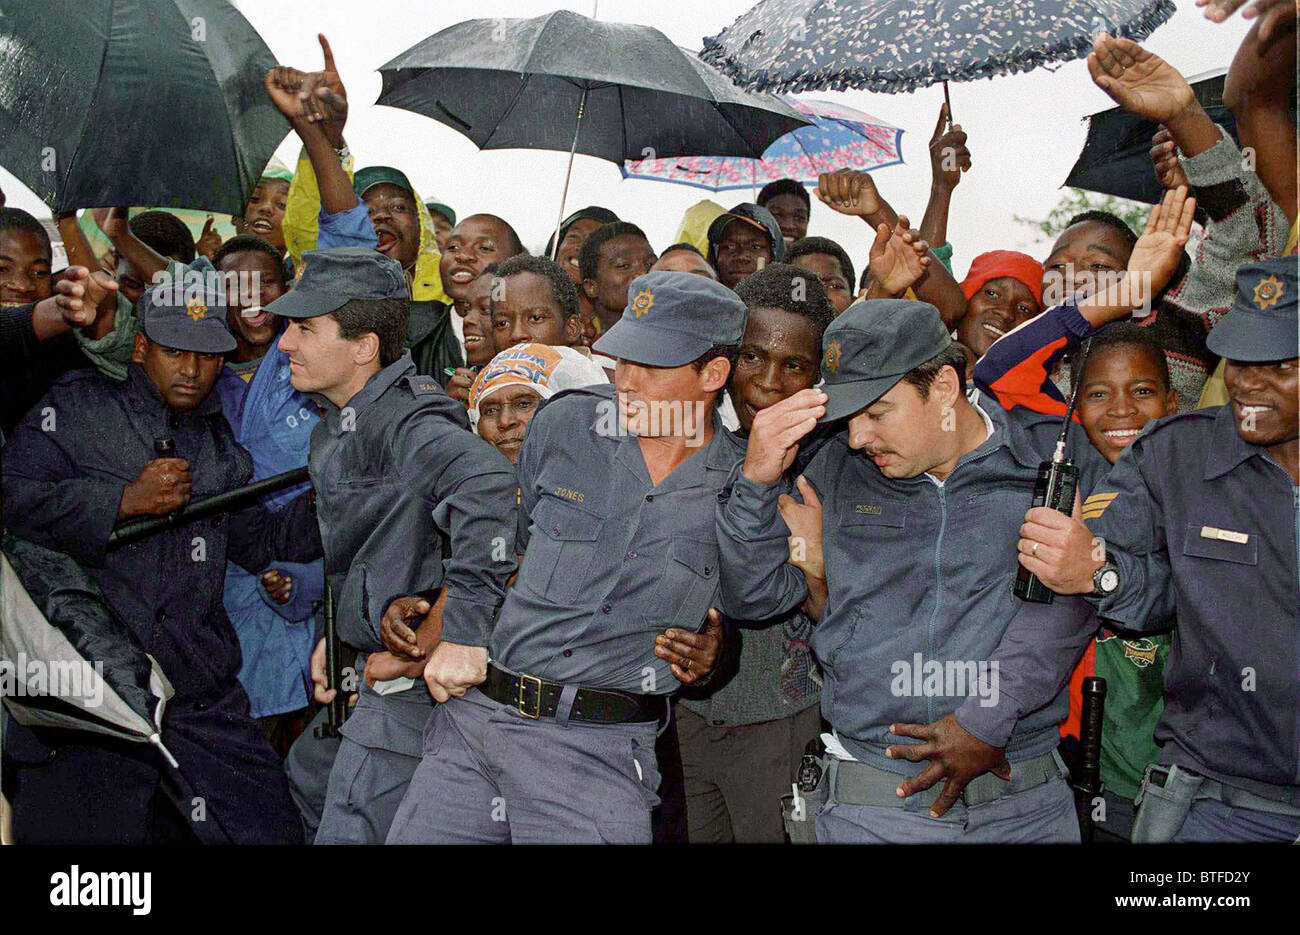 CROWD CONTROL SECURITY FOR VIP VISIT TO UMLAZI, DURBAN, SOUTH AFRICA. Stock Photo